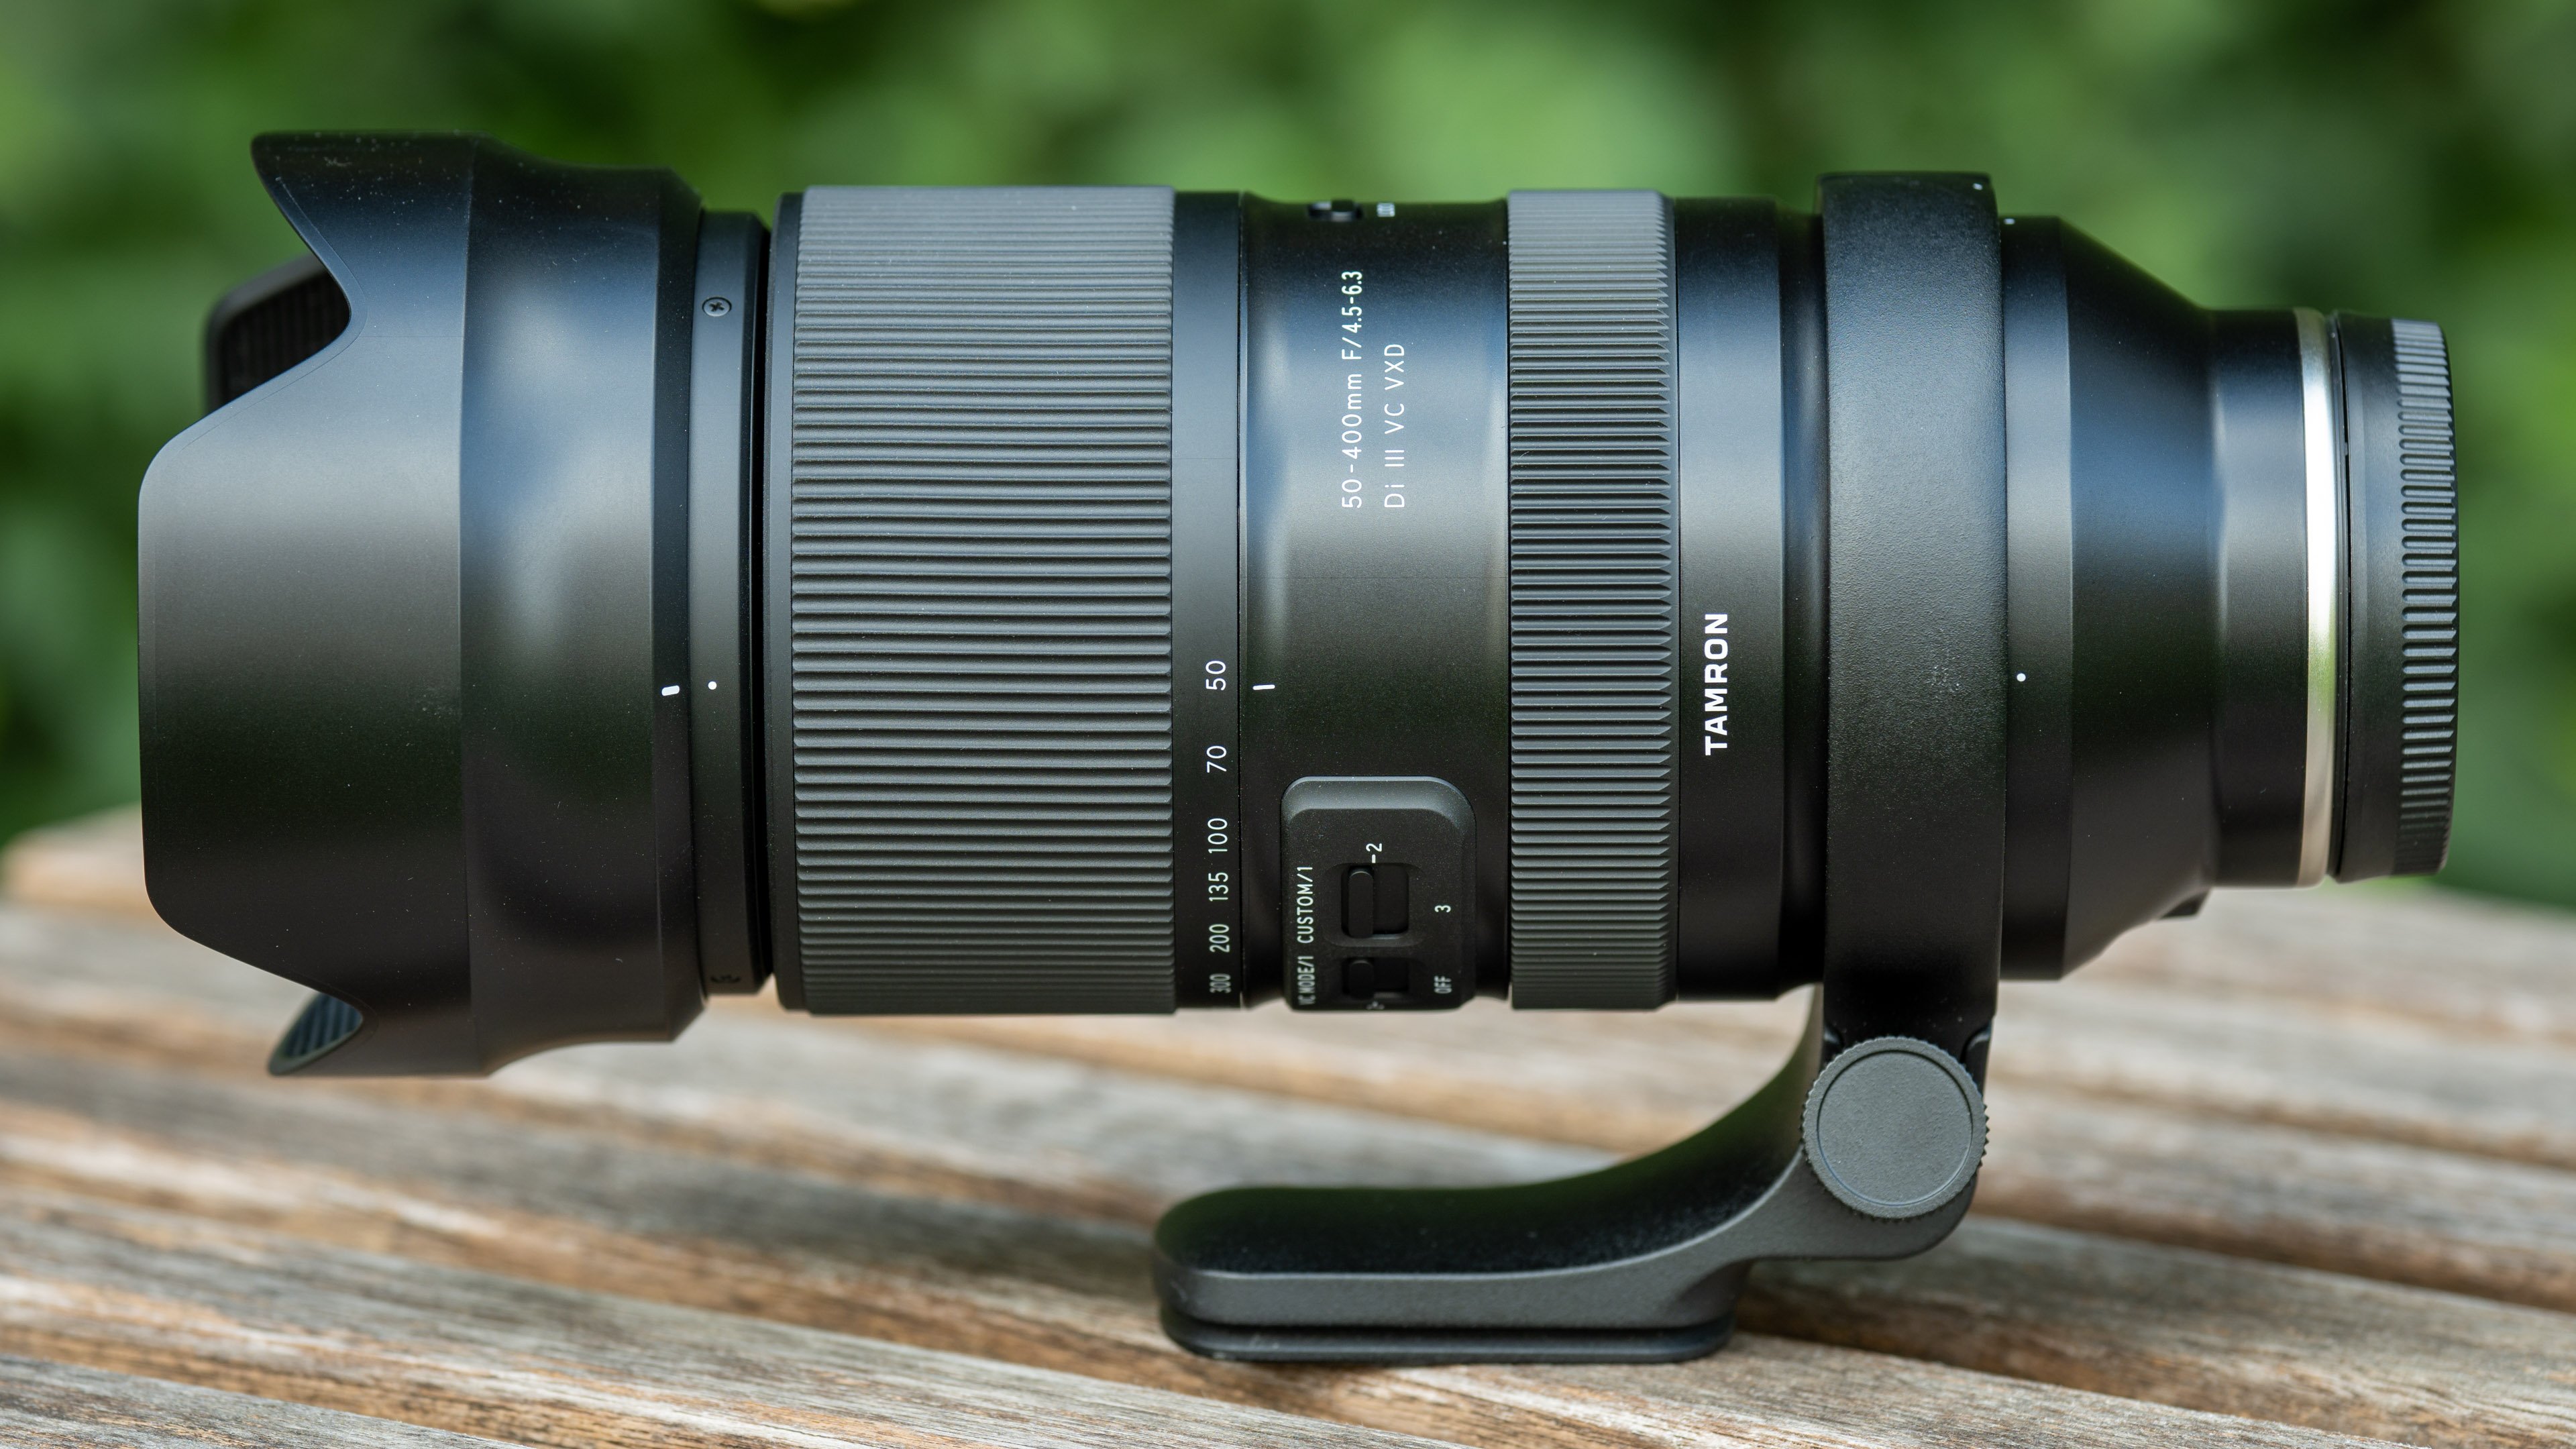 Tamron 50-400mm f4.5-6.3 Di III VC review | Cameralabs